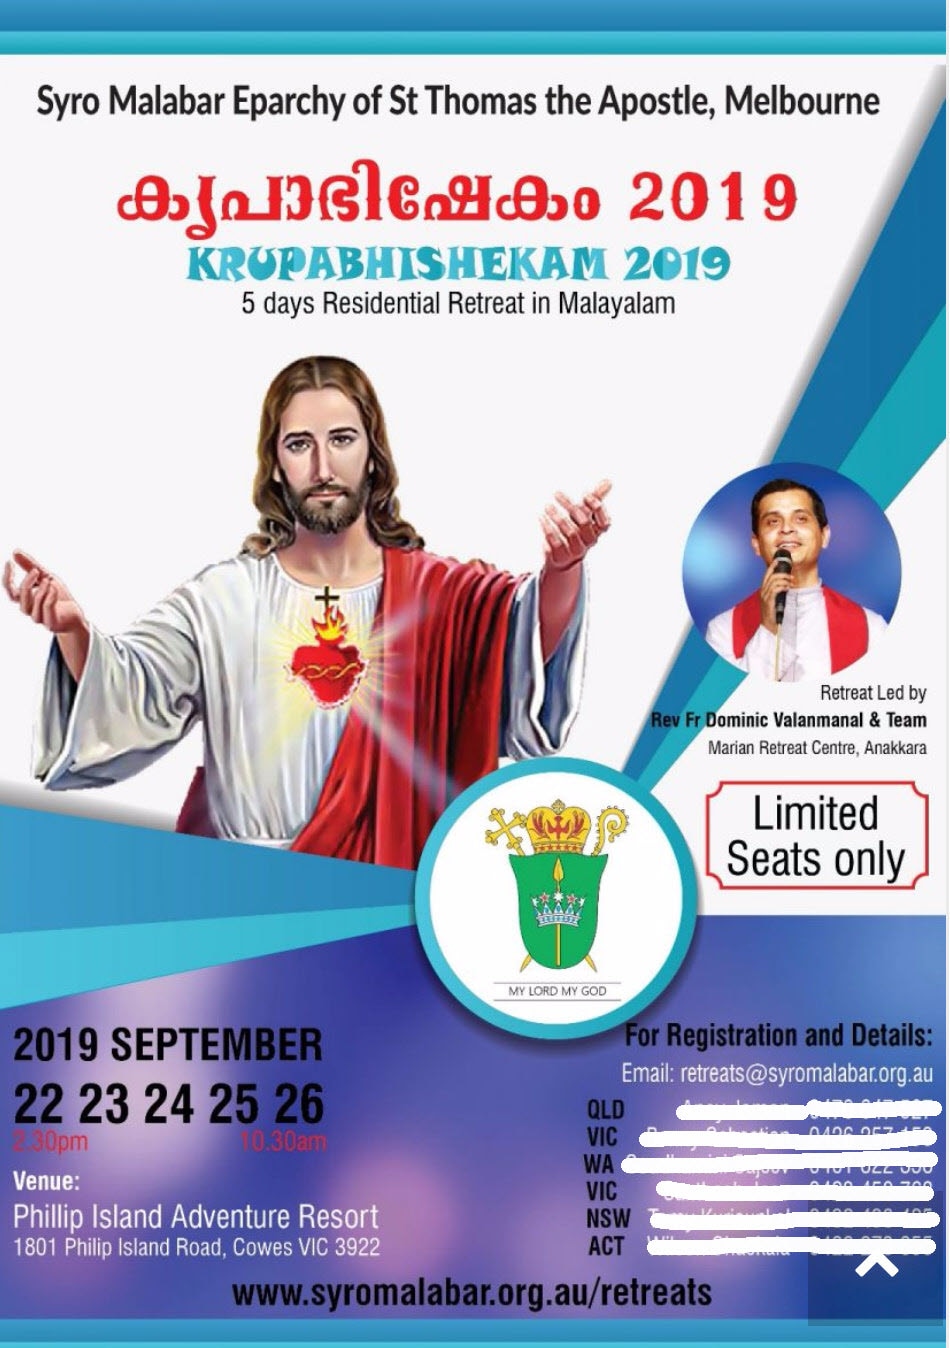 Flyer of Fr. Valanmanal's planned retreat in Melbourne